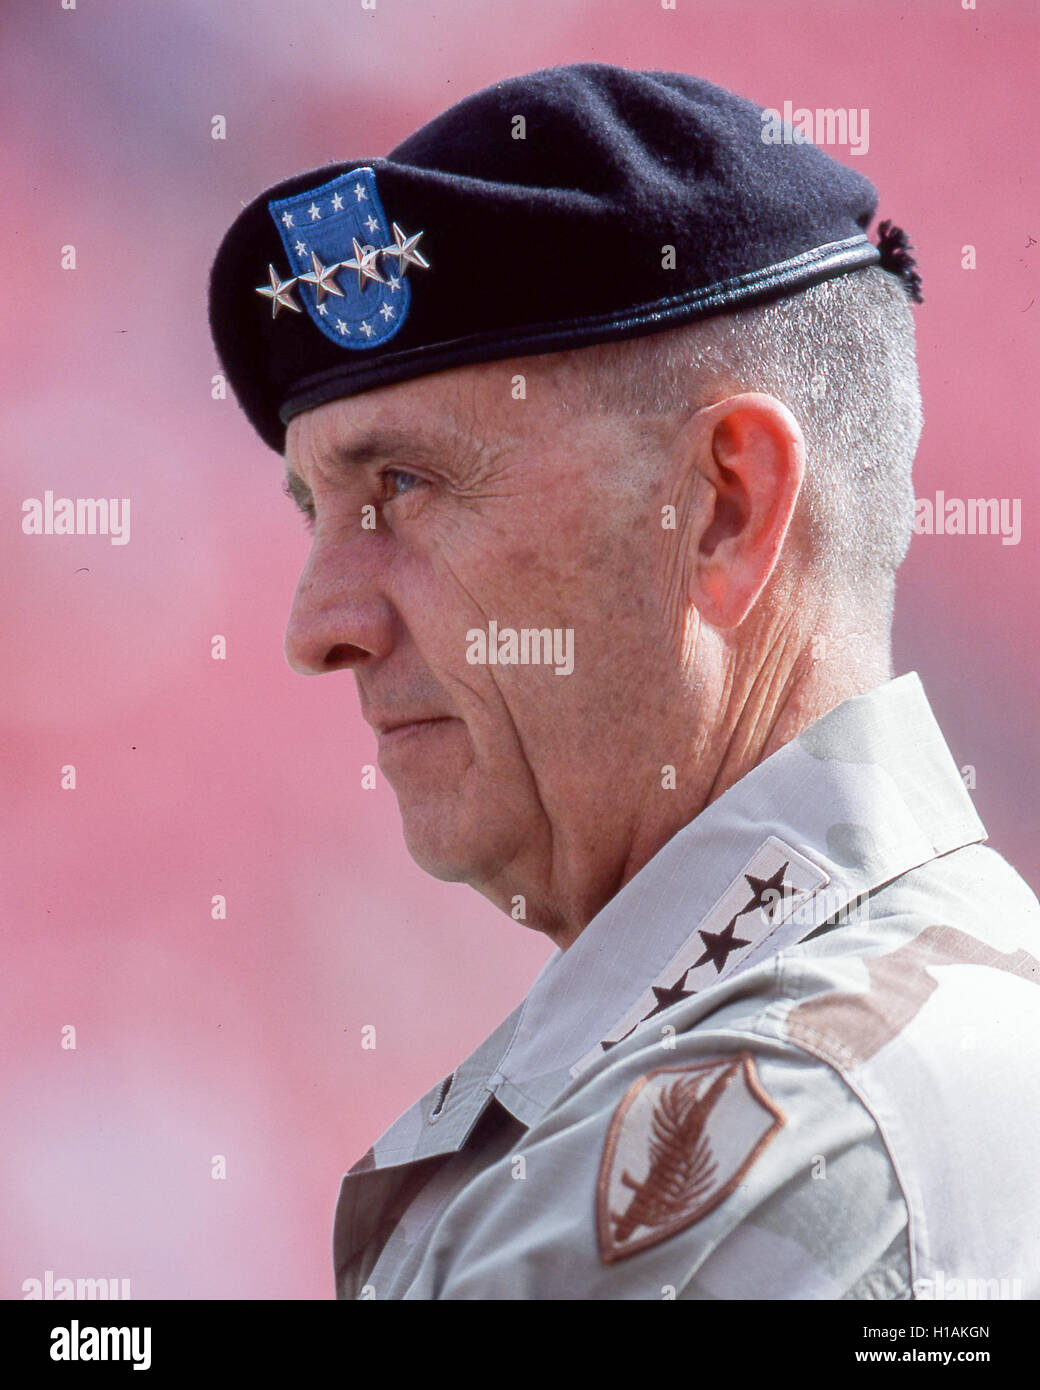 December 8, 2001 - Tampa, Florida, US - Tommy Ray Franks is a retired 4-star United States Army general. His last post was as the Commander of the U.S. Central Command, overseeing U.S. military operations in a 25-country region, including the Middle East. Franks was the U.S. general who led the attack on the Taliban in Afghanistan in response to the September 11 attacks on the World Trade Center and The Pentagon in 2001. He also led the 2003 invasion of Iraq and the overthrow of Saddam Hussein. Born June 17, 1945, he retired on July 7, 2003. (Credit Image: © Arnold Drapkin via ZUMA Wire) Stock Photo